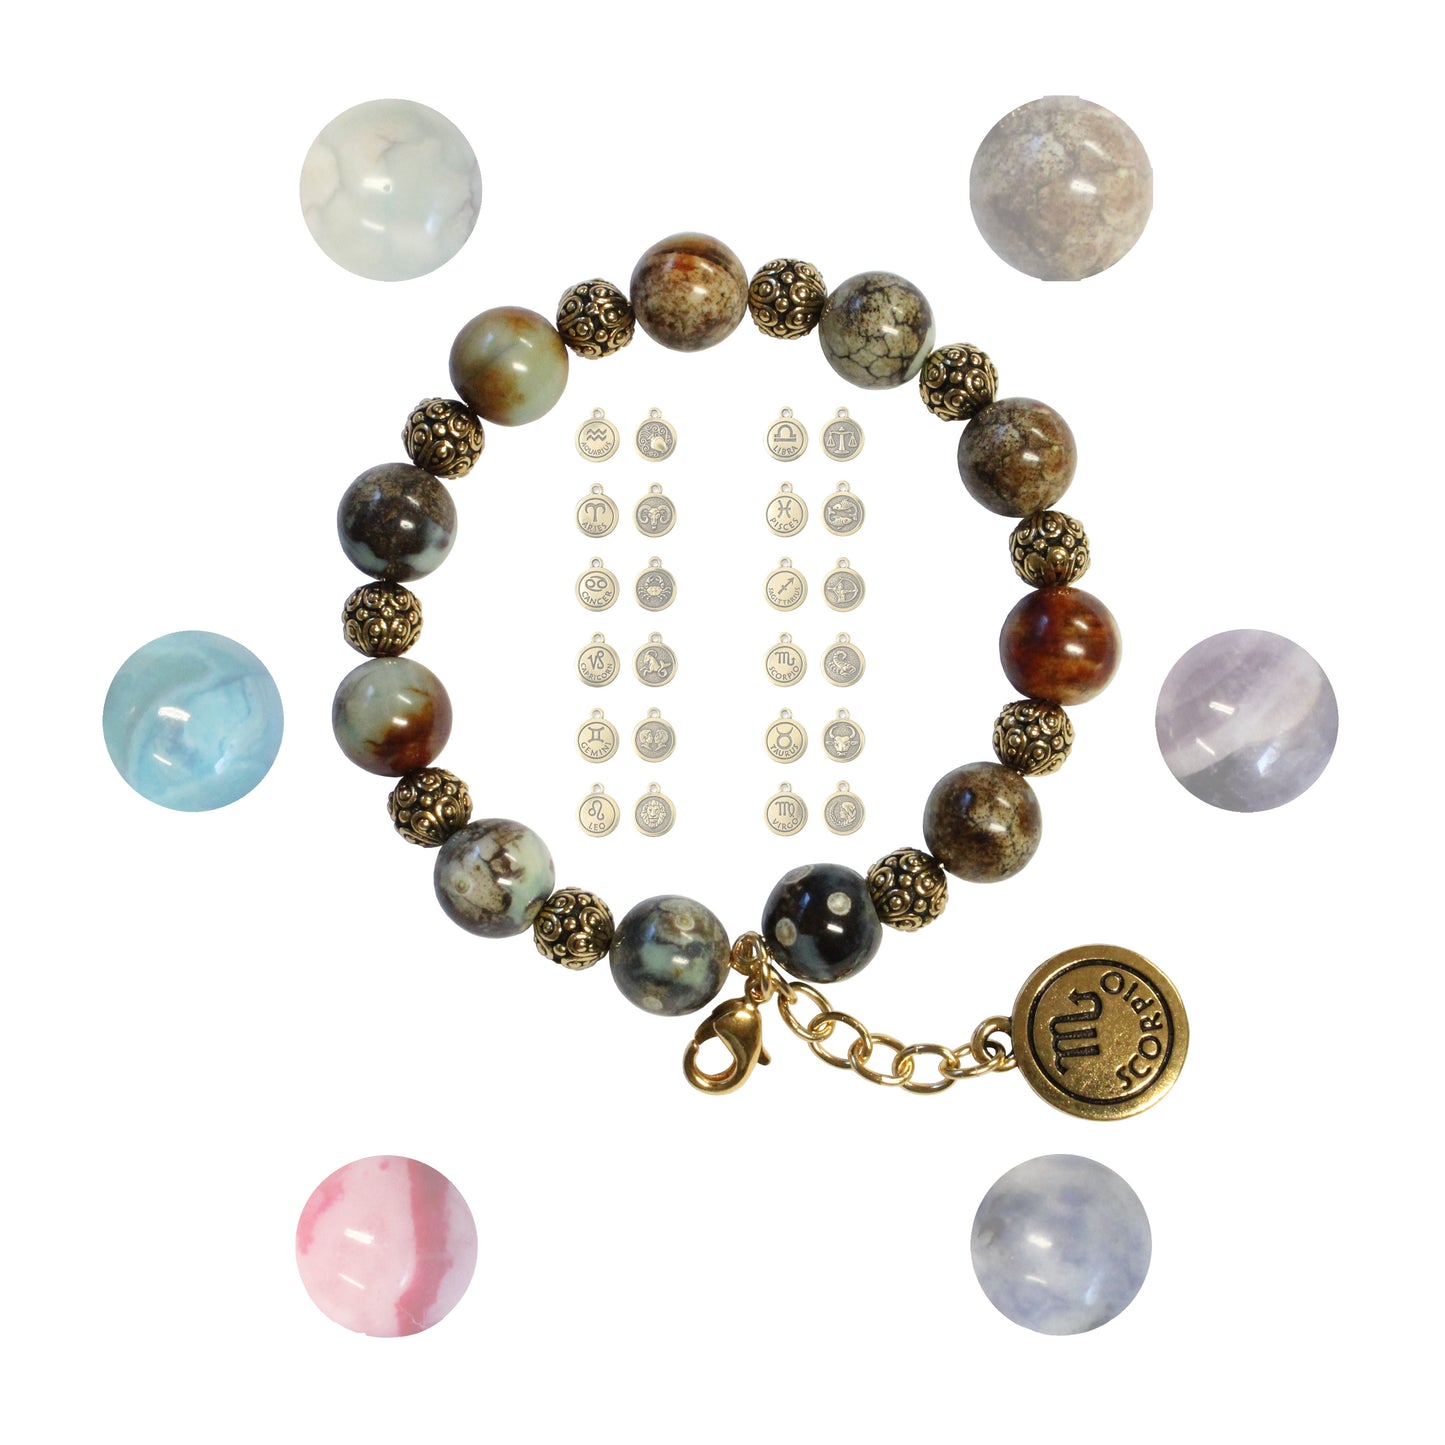 Gemstone Bracelet with zodiac charm / 6 to 7 Inch wrist size / gold pewter beads / choose your sign and gemstone